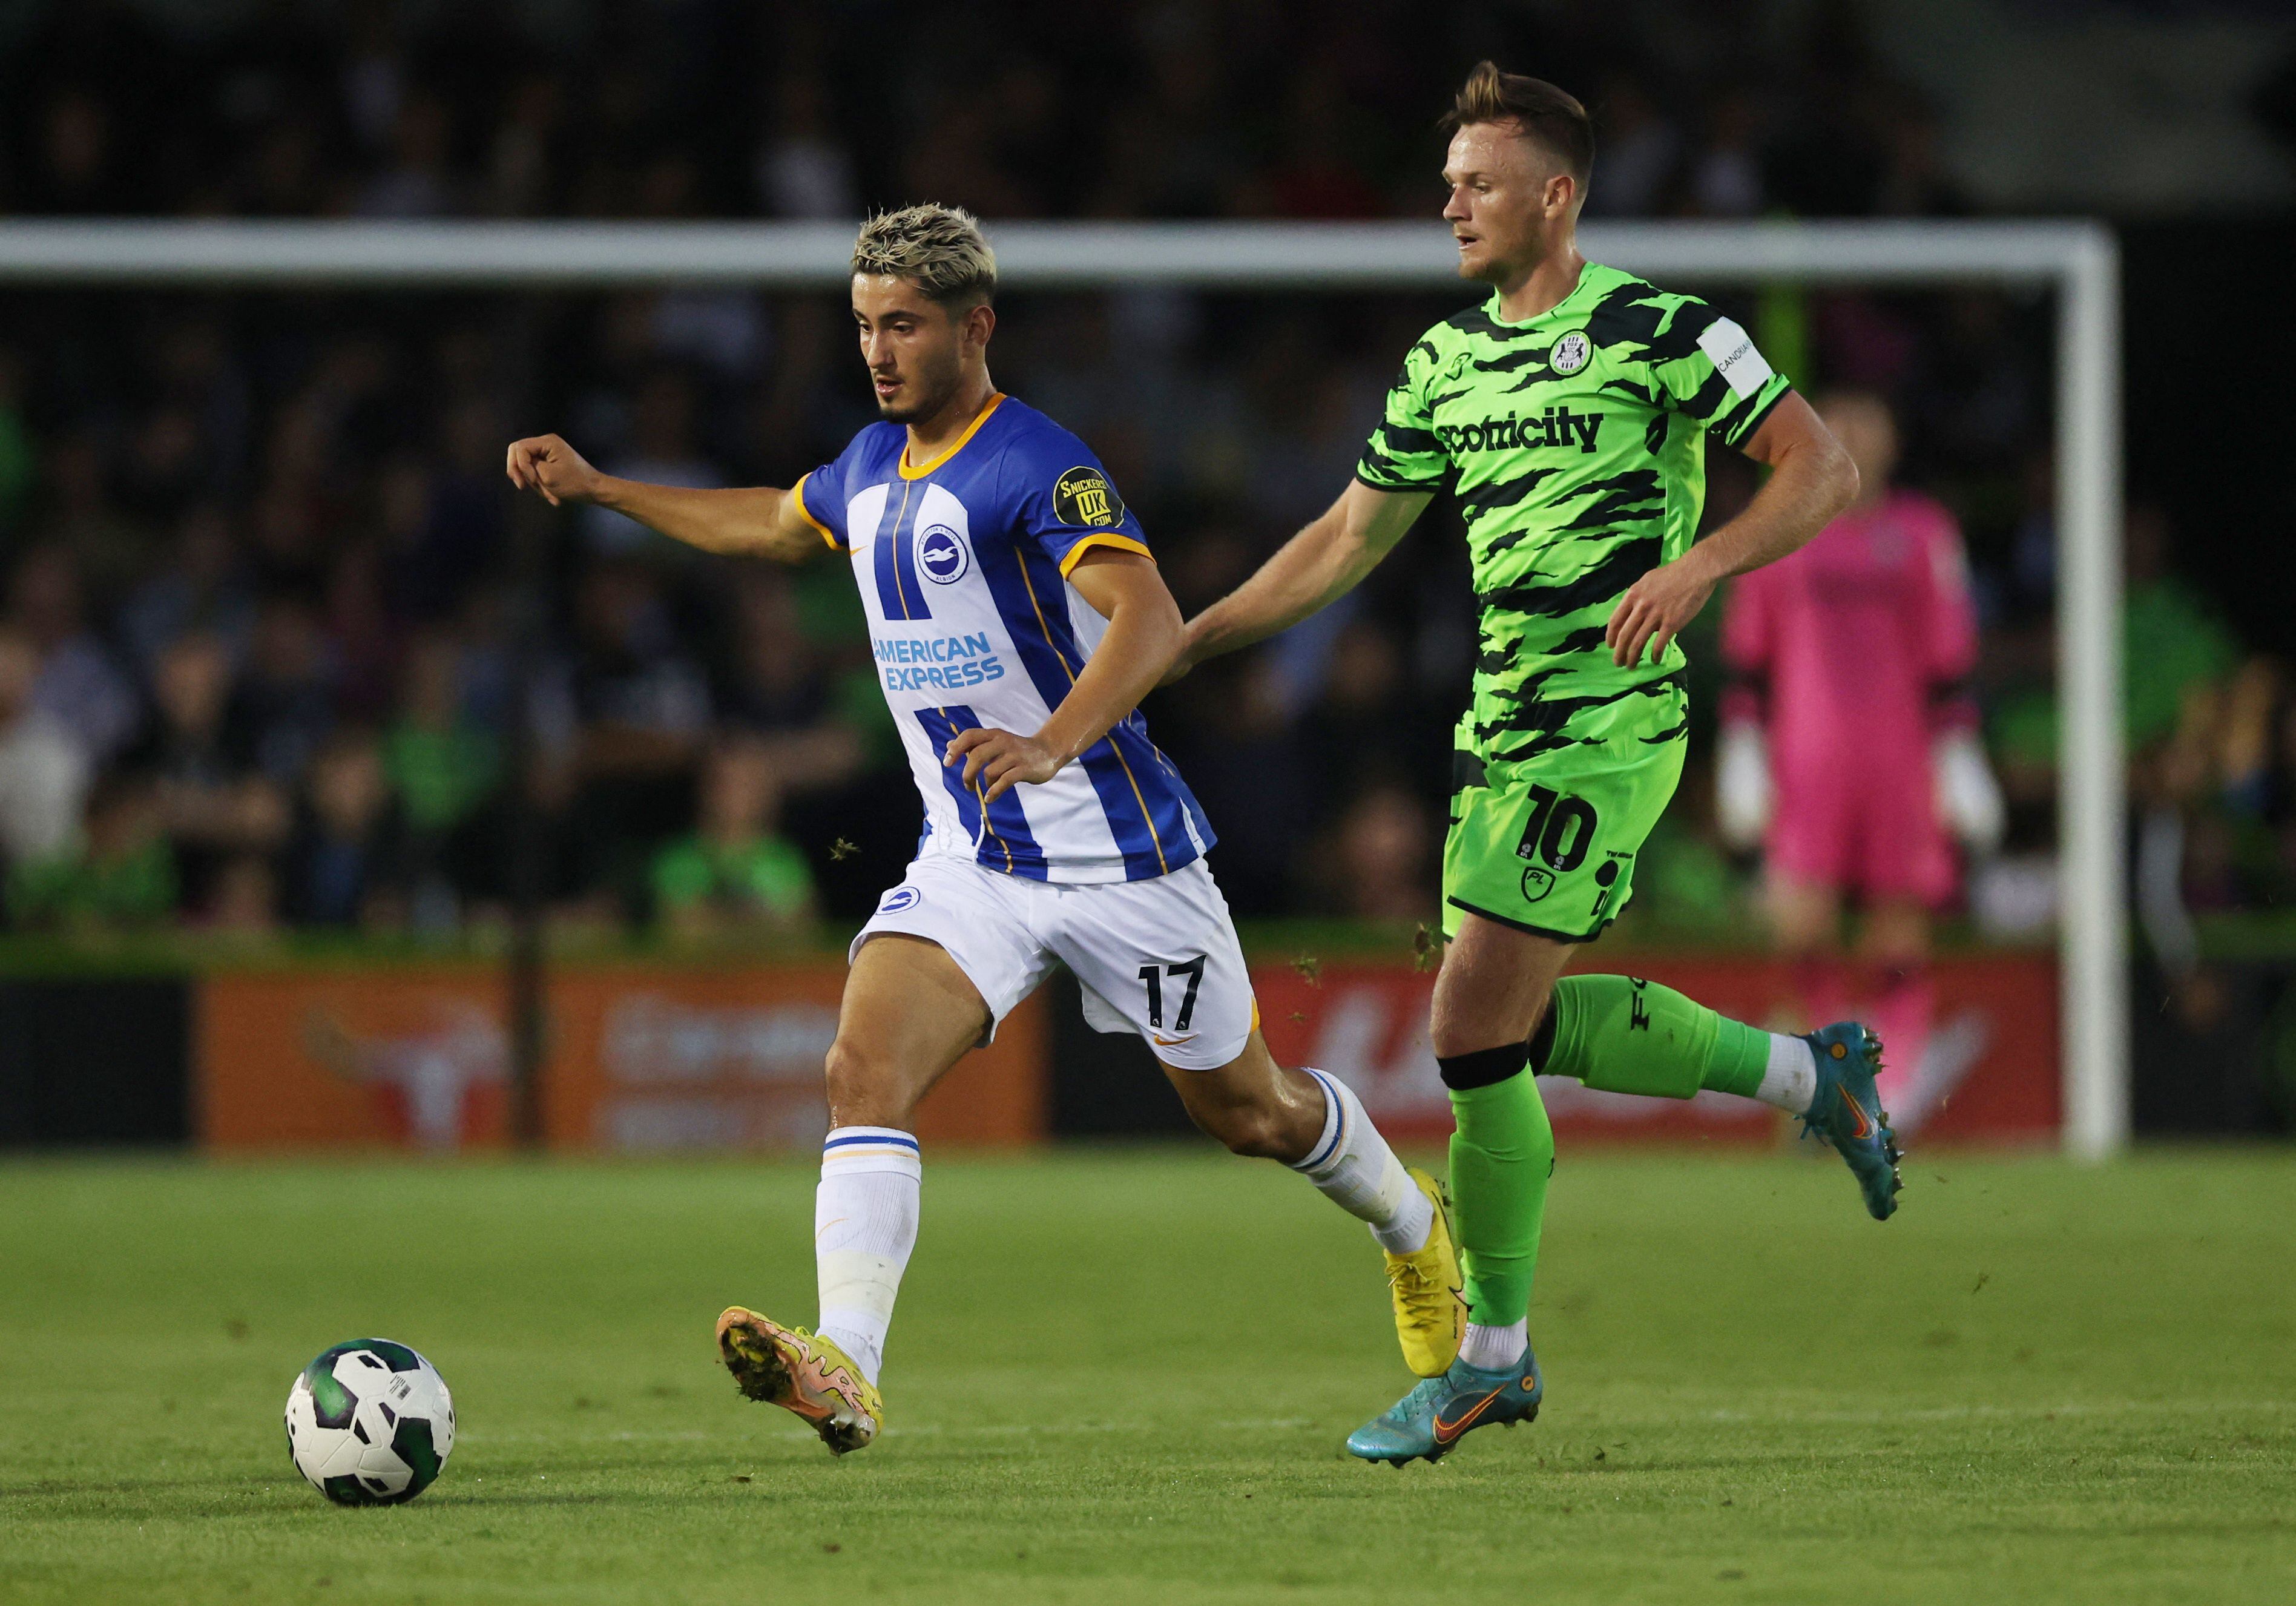 Soccer Football - Carabao Cup Second Round - Forest Green Rovers v Brighton & Hove Albion - The New Lawn, Nailsworth, Britain - August 24, 2022 Brighton & Hove Albion's Steven Alzate in action with Forest Green Rovers' Armani Little Action Images via Reuters/Matthew Childs EDITORIAL USE ONLY. No use with unauthorized audio, video, data, fixture lists, club/league logos or 'live' services. Online in-match use limited to 75 images, no video emulation. No use in betting, games or single club /league/player publications.  Please contact your account representative for further details.